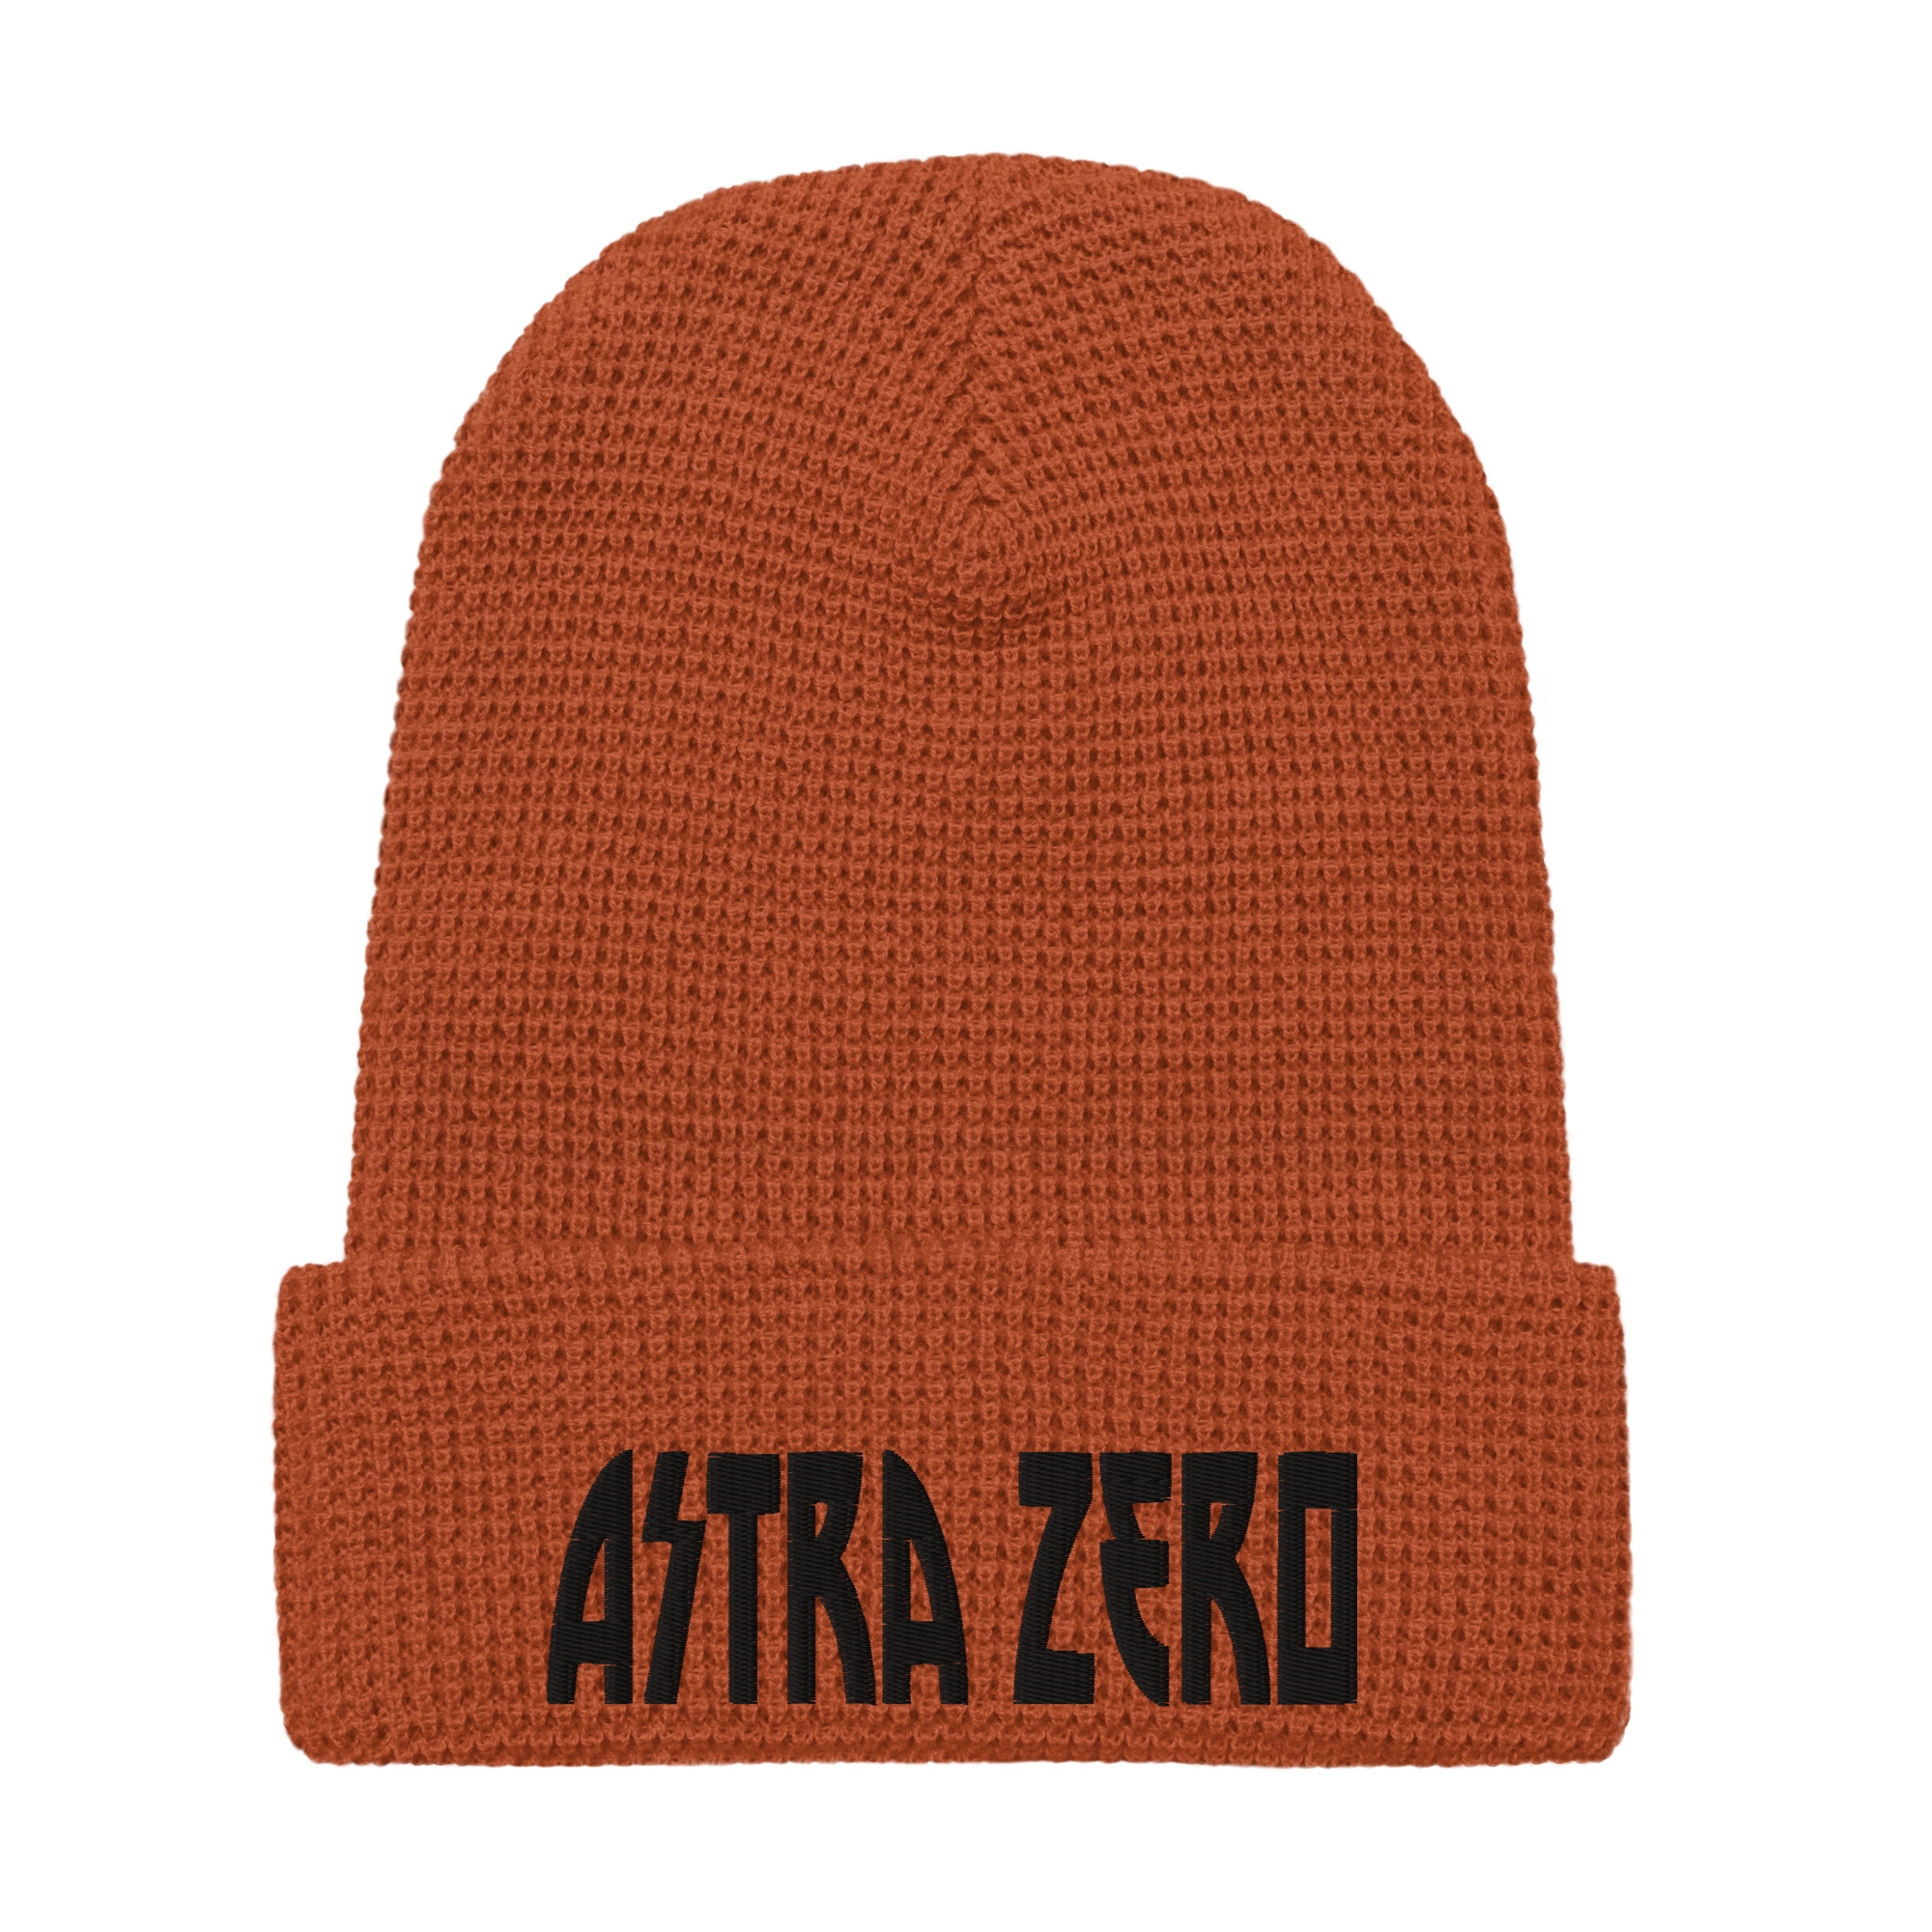 Featured image for “Astra Zero - Waffle beanie”